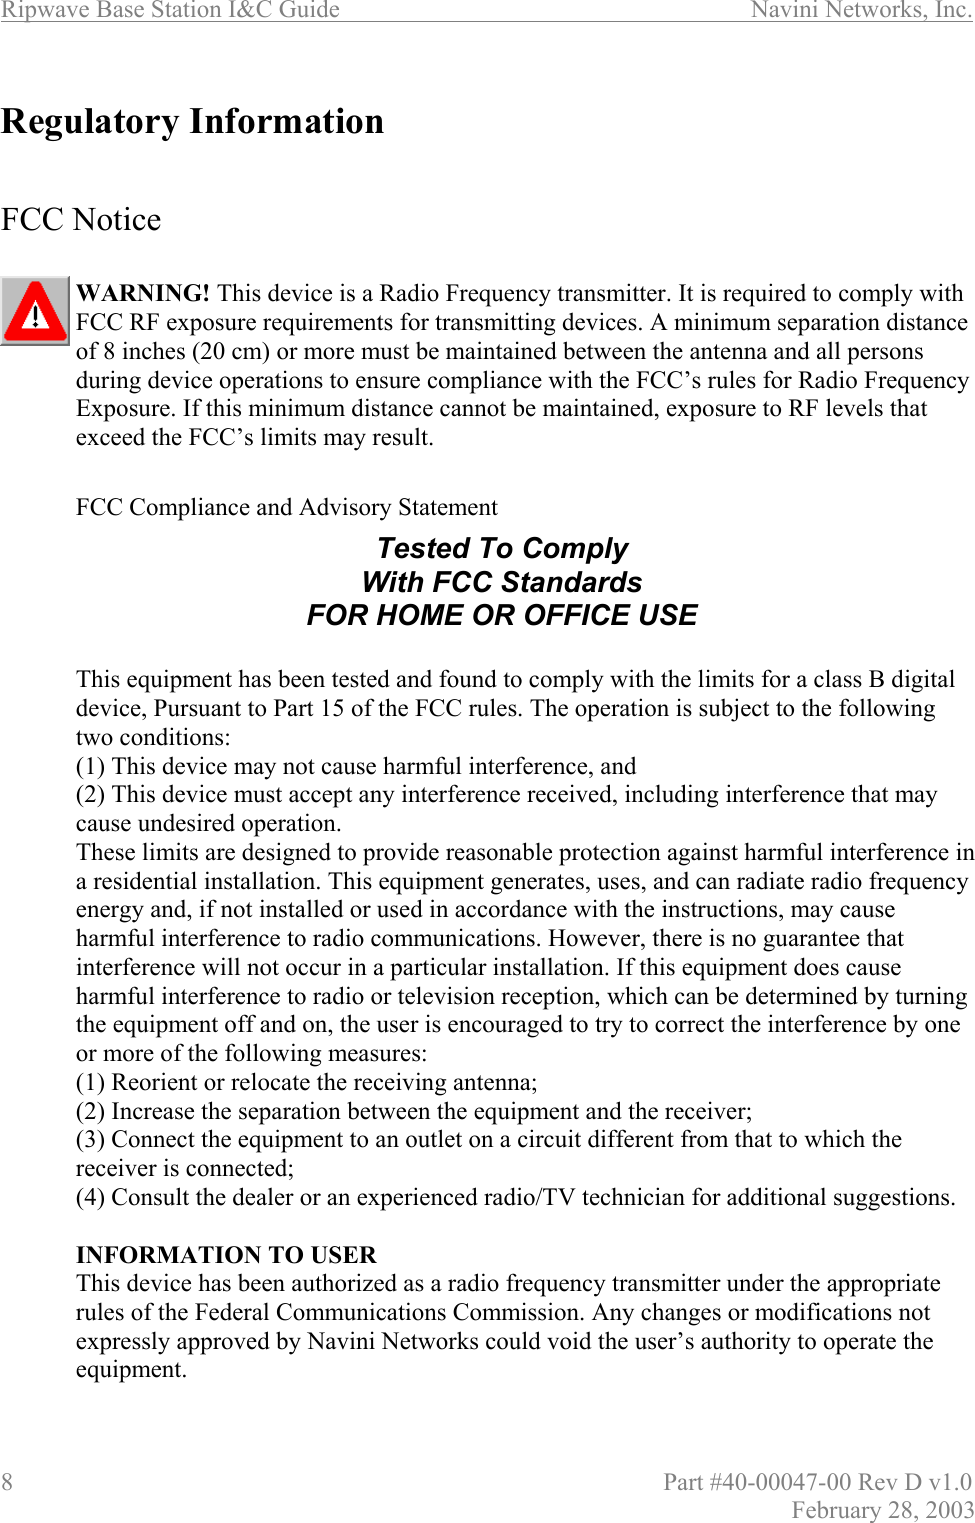 Ripwave Base Station I&amp;C Guide                      Navini Networks, Inc. 8                          Part #40-00047-00 Rev D v1.0 February 28, 2003  Regulatory Information   FCC Notice  WARNING! This device is a Radio Frequency transmitter. It is required to comply with FCC RF exposure requirements for transmitting devices. A minimum separation distance of 8 inches (20 cm) or more must be maintained between the antenna and all persons during device operations to ensure compliance with the FCC’s rules for Radio Frequency Exposure. If this minimum distance cannot be maintained, exposure to RF levels that exceed the FCC’s limits may result.     FCC Compliance and Advisory Statement      This equipment has been tested and found to comply with the limits for a class B digital device, Pursuant to Part 15 of the FCC rules. The operation is subject to the following two conditions:   (1) This device may not cause harmful interference, and (2) This device must accept any interference received, including interference that may cause undesired operation. These limits are designed to provide reasonable protection against harmful interference in a residential installation. This equipment generates, uses, and can radiate radio frequency energy and, if not installed or used in accordance with the instructions, may cause harmful interference to radio communications. However, there is no guarantee that interference will not occur in a particular installation. If this equipment does cause harmful interference to radio or television reception, which can be determined by turning the equipment off and on, the user is encouraged to try to correct the interference by one or more of the following measures: (1) Reorient or relocate the receiving antenna; (2) Increase the separation between the equipment and the receiver;  (3) Connect the equipment to an outlet on a circuit different from that to which the receiver is connected; (4) Consult the dealer or an experienced radio/TV technician for additional suggestions.  INFORMATION TO USER This device has been authorized as a radio frequency transmitter under the appropriate rules of the Federal Communications Commission. Any changes or modifications not expressly approved by Navini Networks could void the user’s authority to operate the equipment. Tested To Comply With FCC Standards FOR HOME OR OFFICE USE 